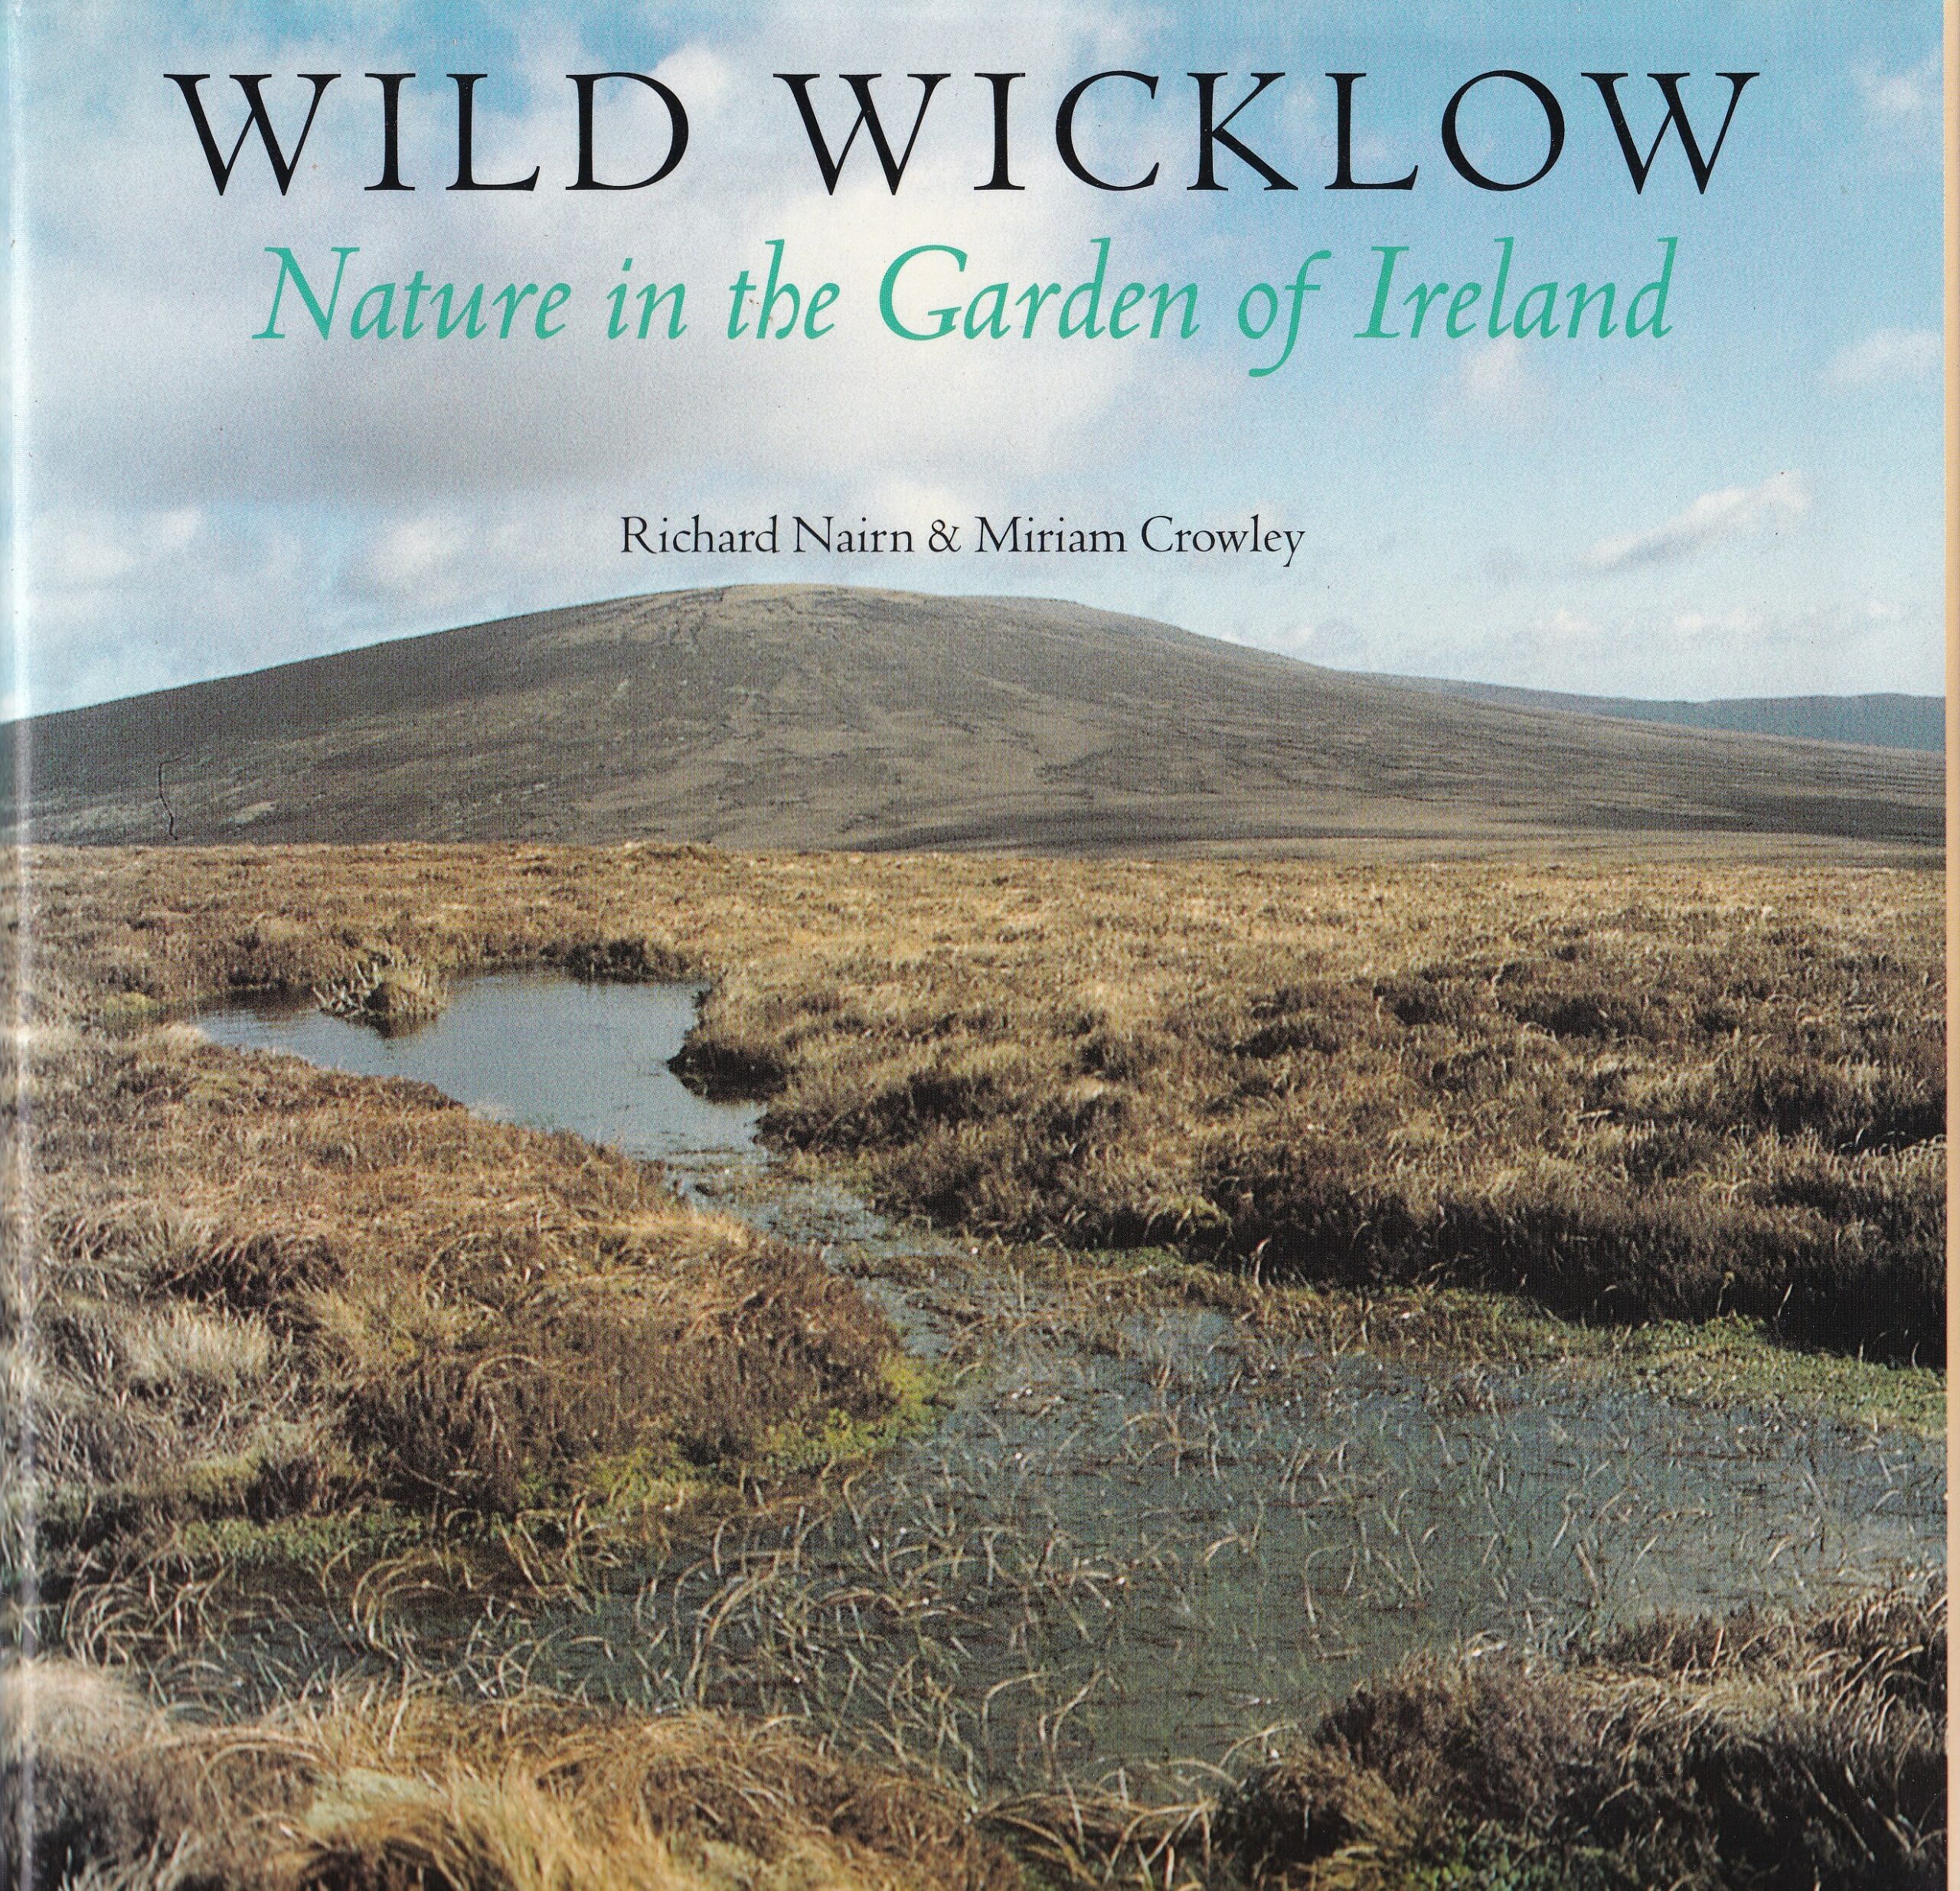 Wild Wicklow: Nature in the Garden of Ireland – Signed | Richard Nairn and Miriam Crowley | Charlie Byrne's